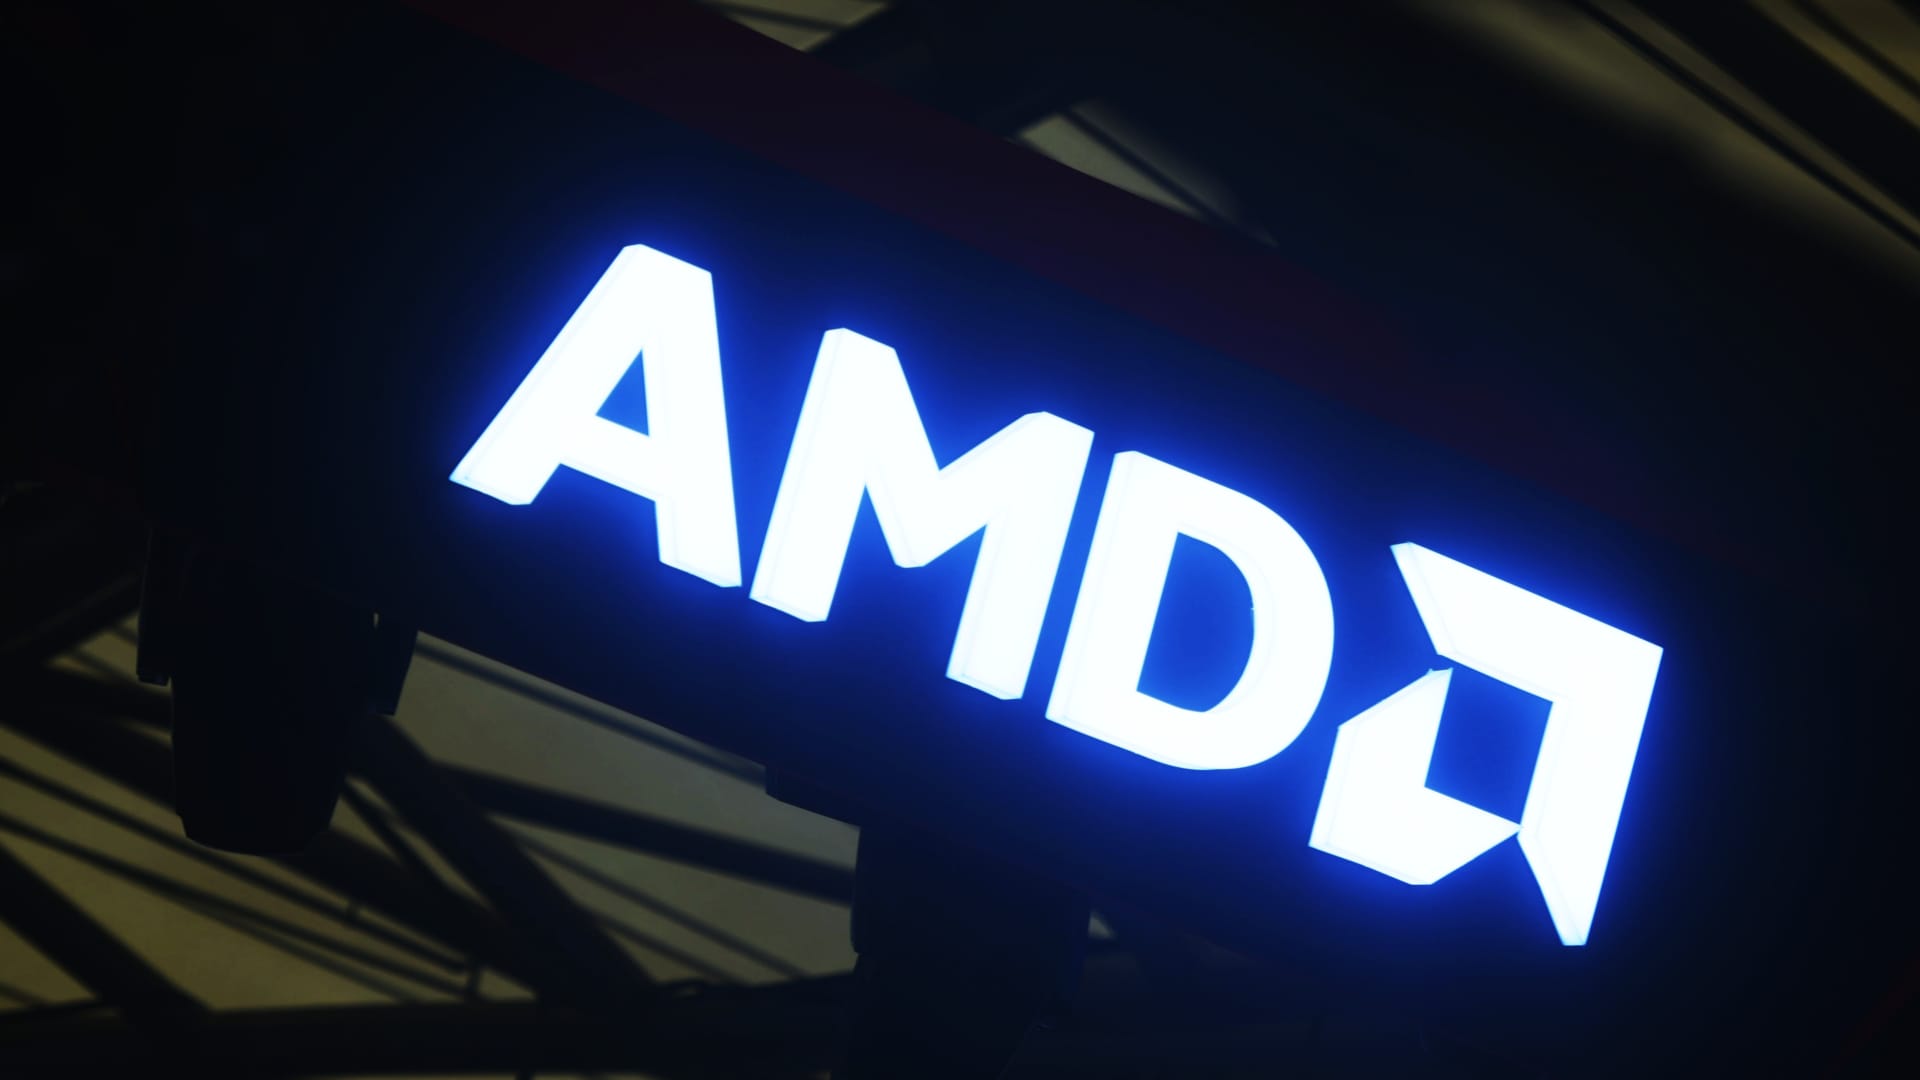 AMD bets on AI-powered PCs as tech race with Nvidia and Intel heats up